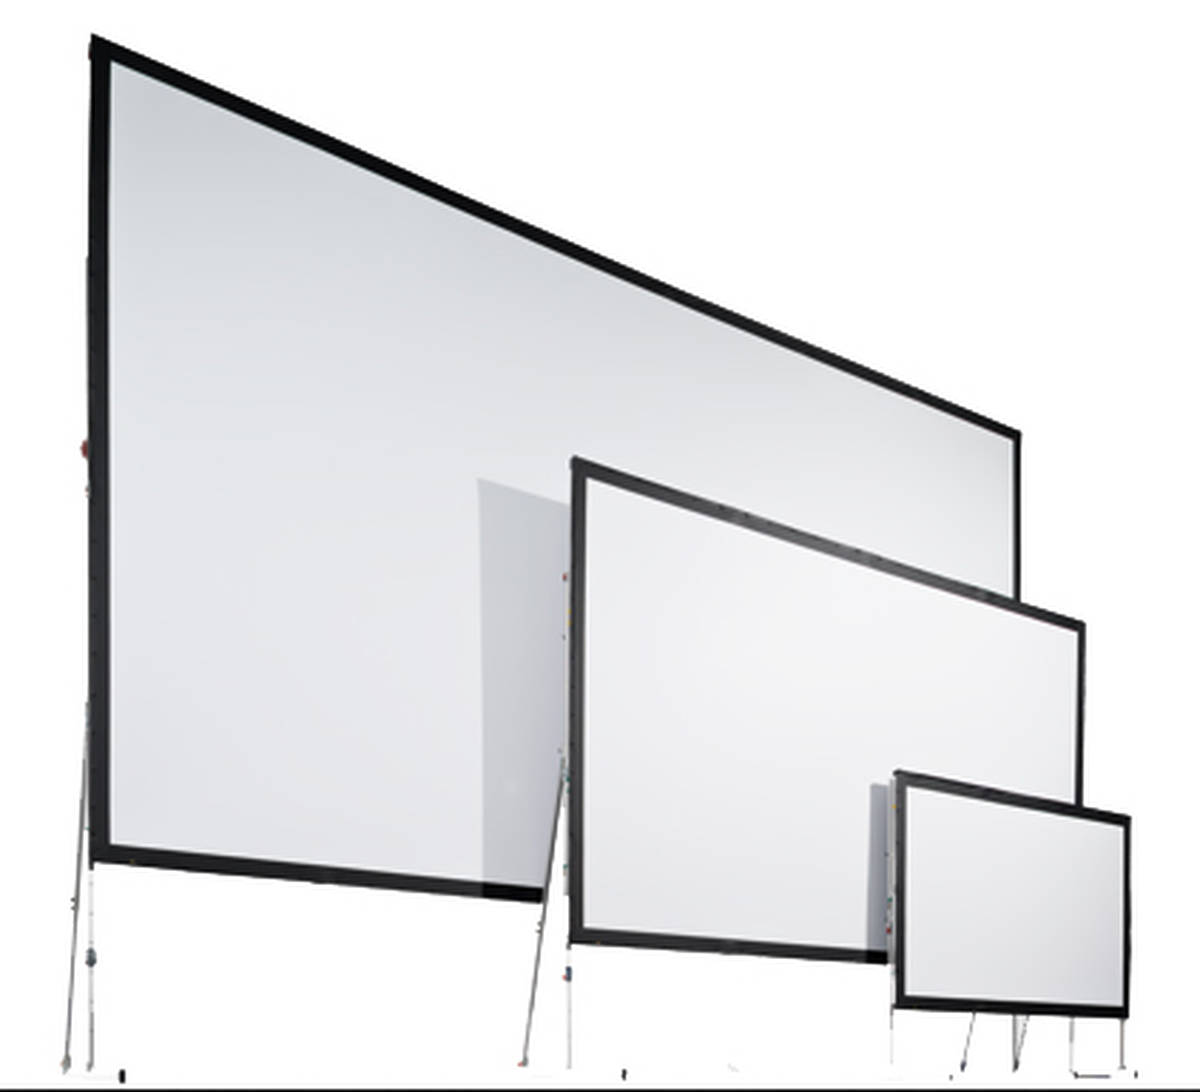 AV Stumpfl BCV-AW447/R10 198" (5.04m)
 16:10 aspect ratio projection screen product image. Click to enlarge.